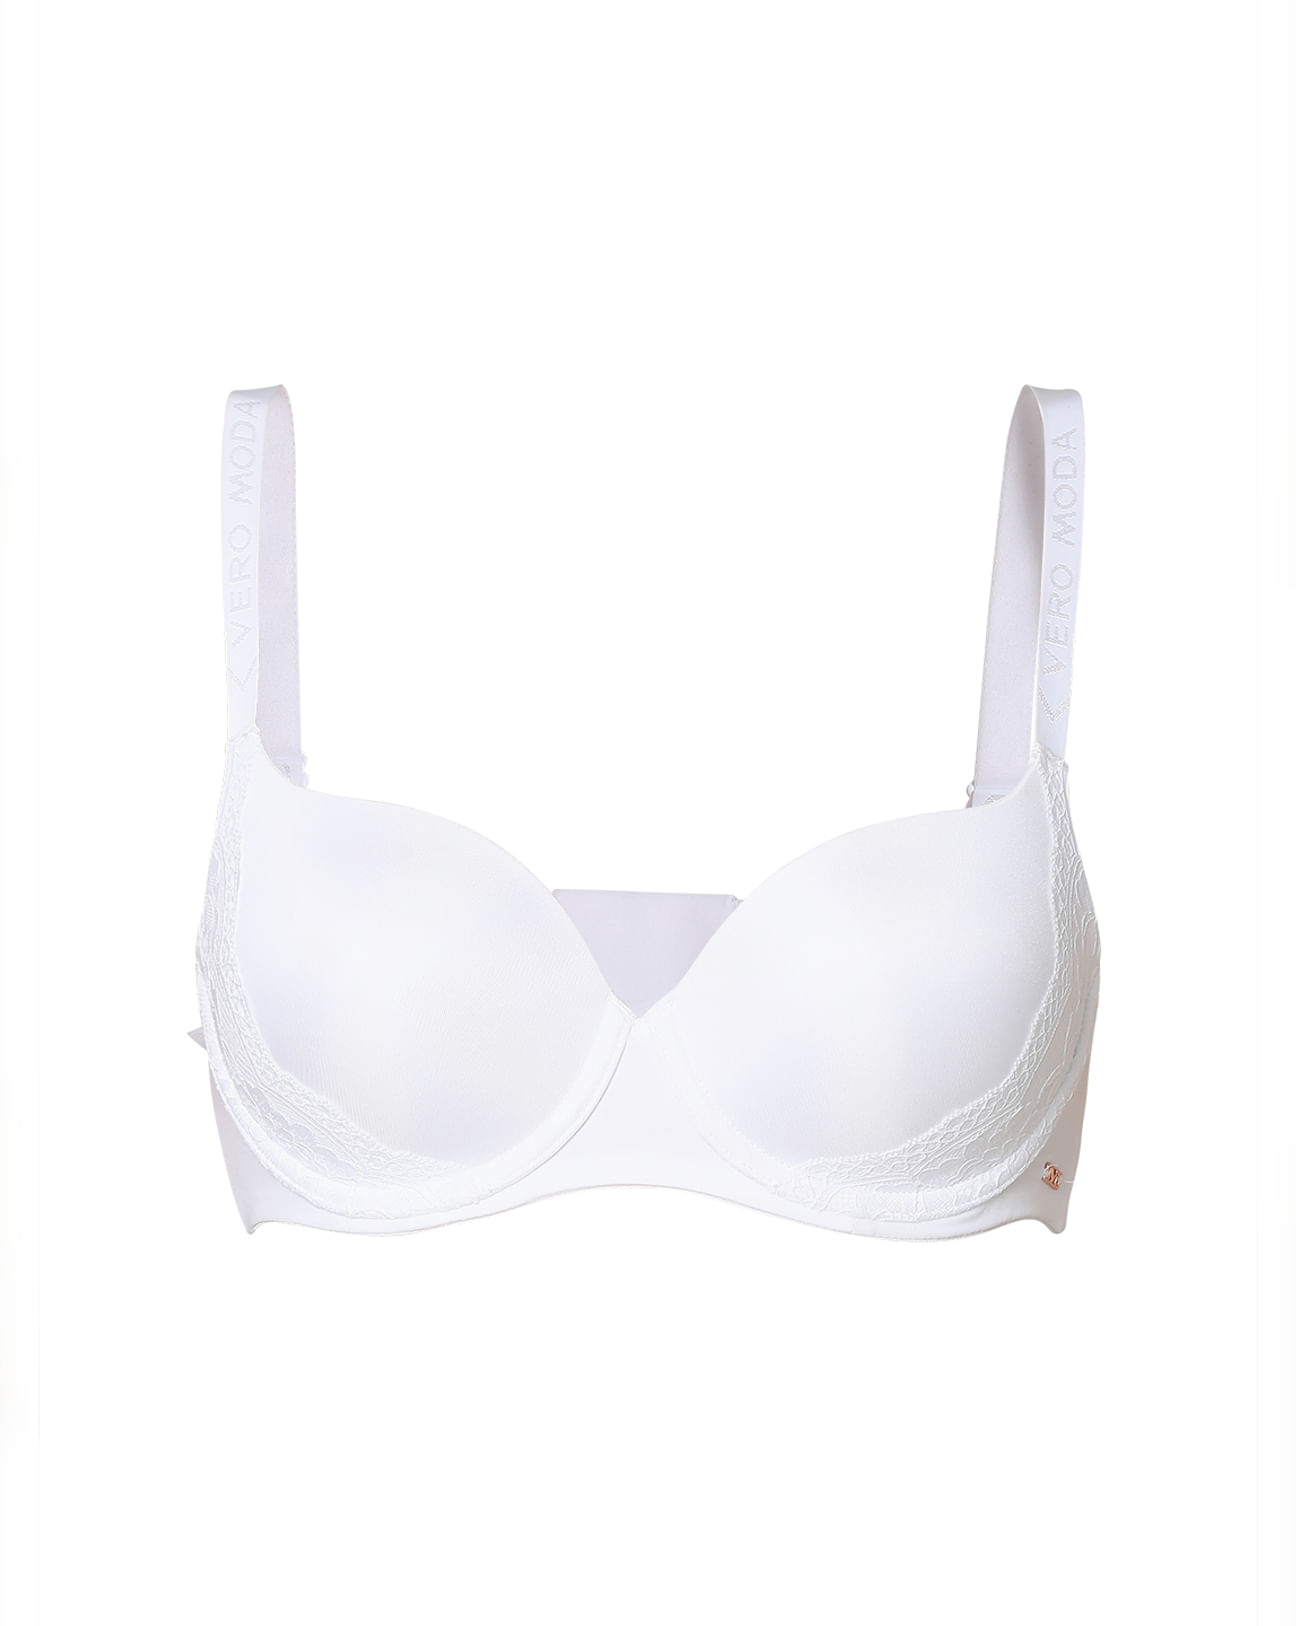 INTIMATES Lavender Padded Non-Wired T-shirt Bra